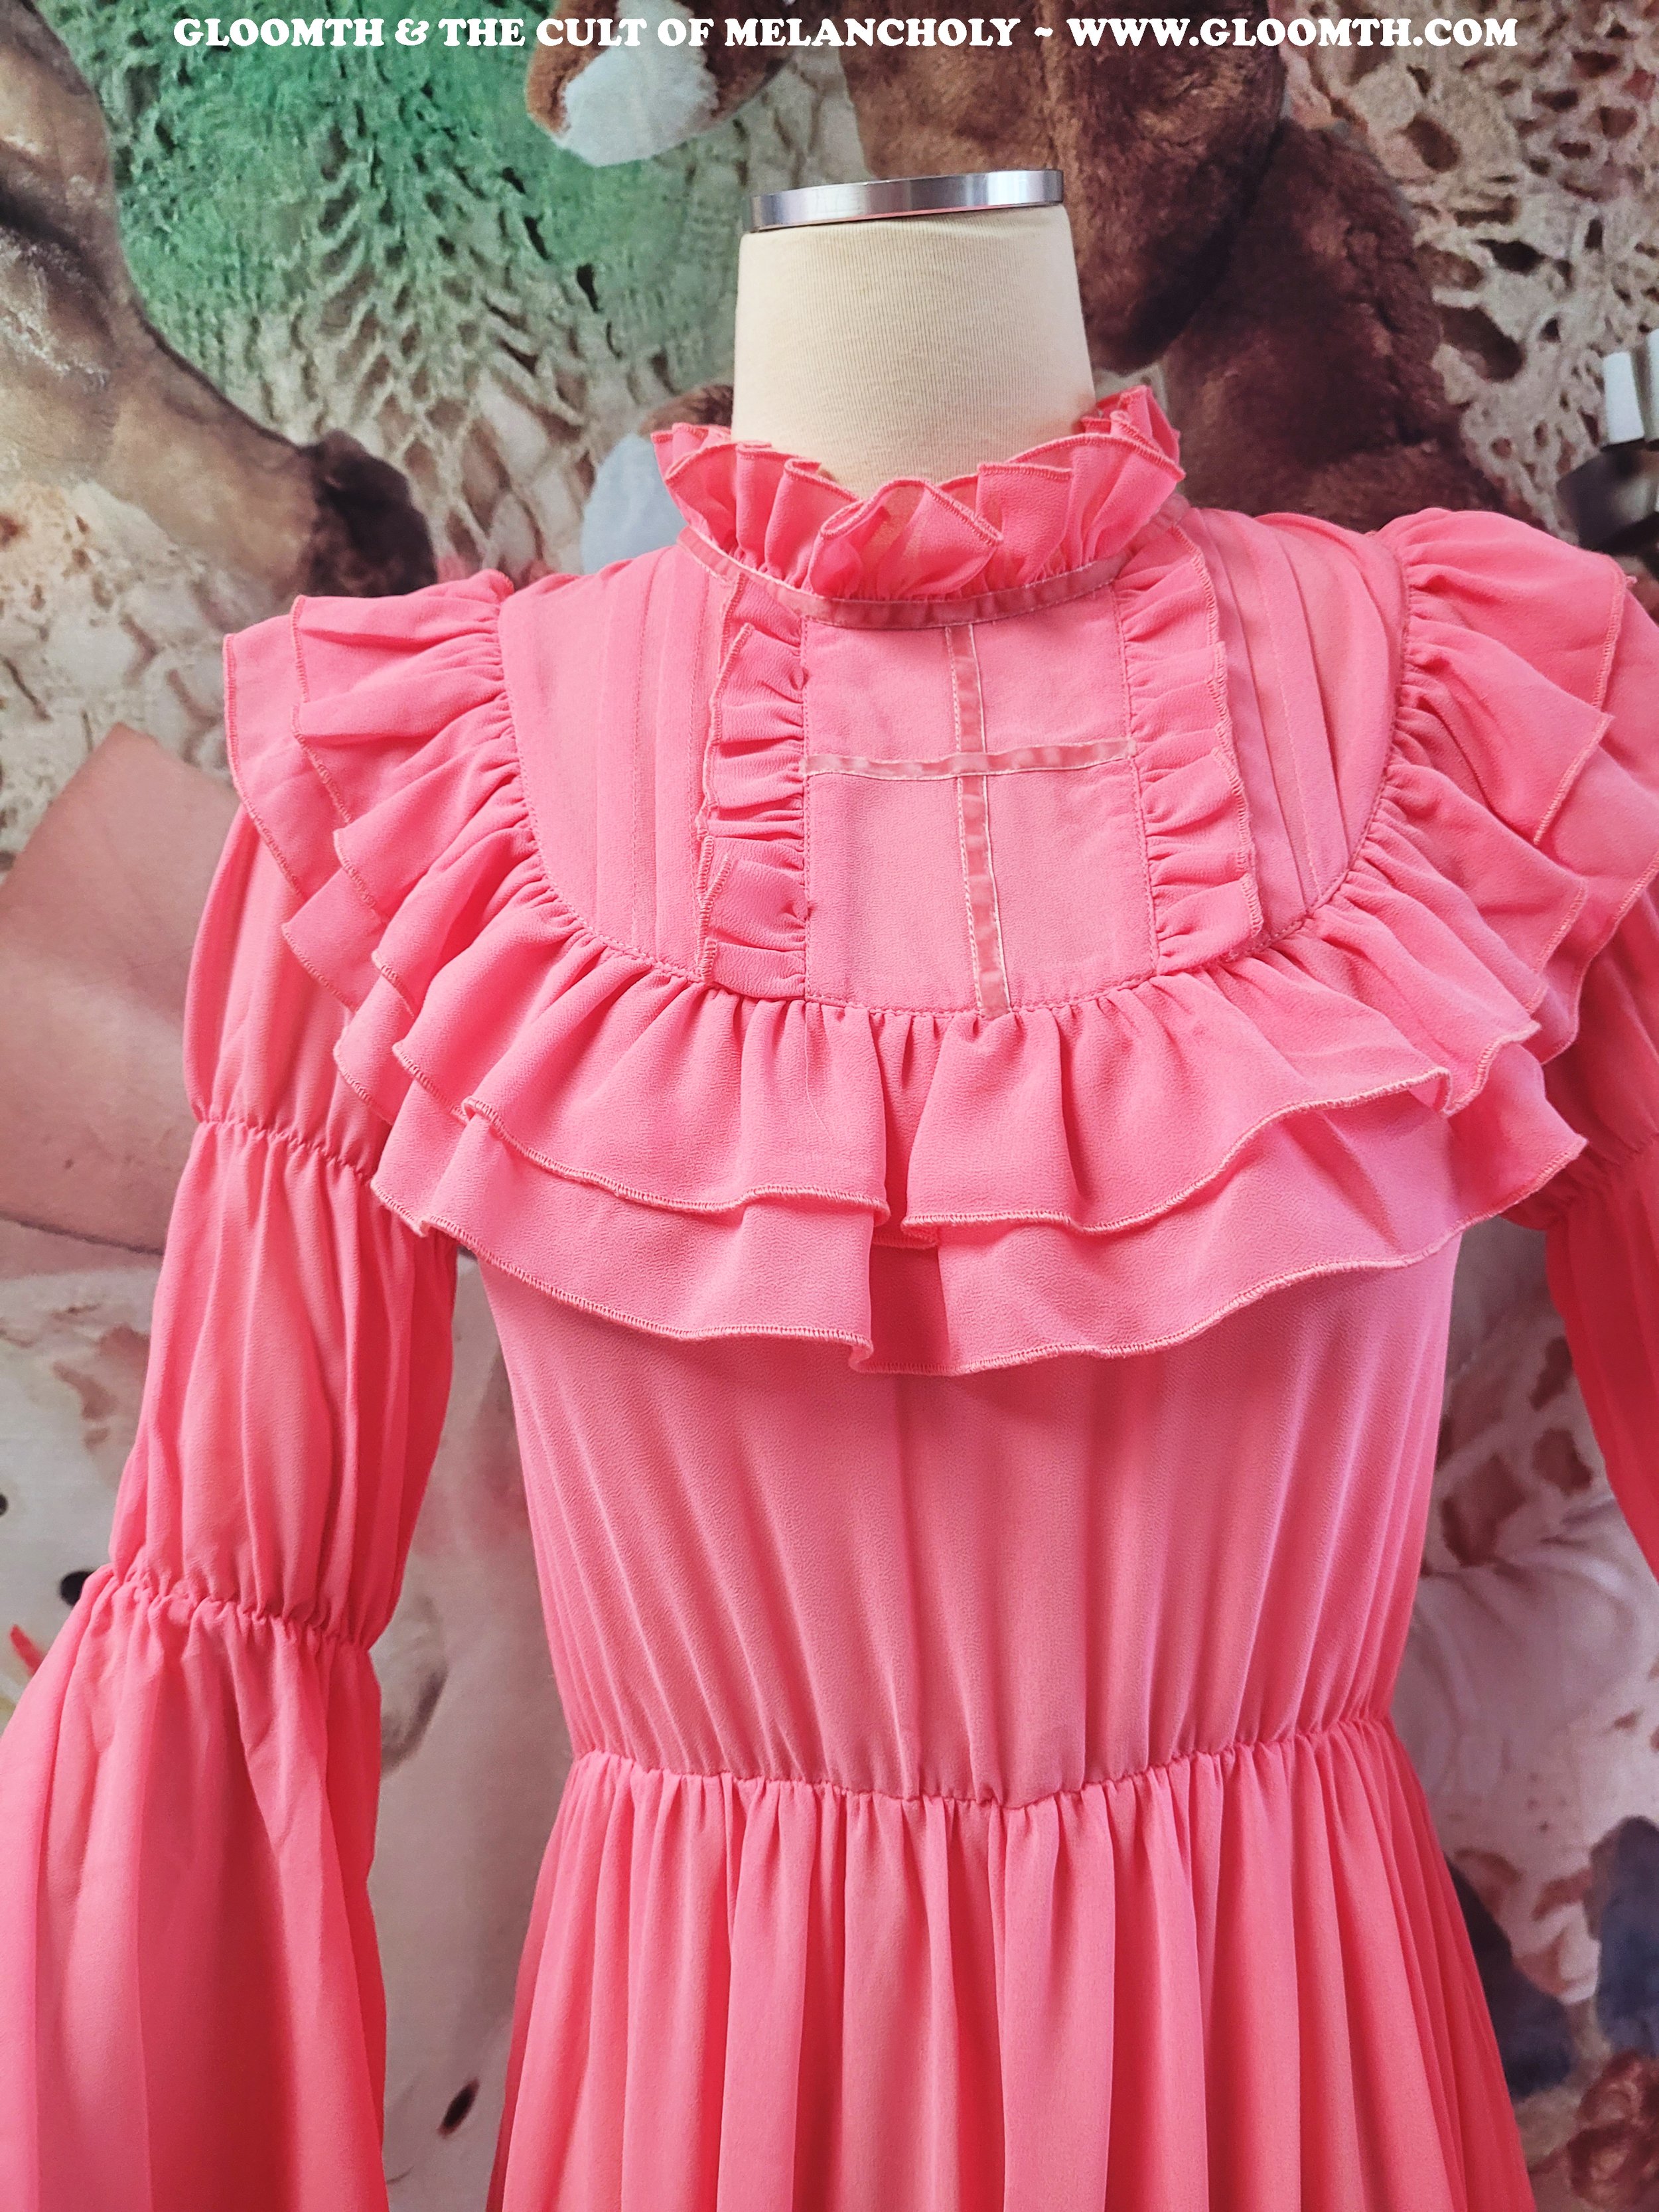 Veronica Pink Victorian Nightgown Dress — Gloomth